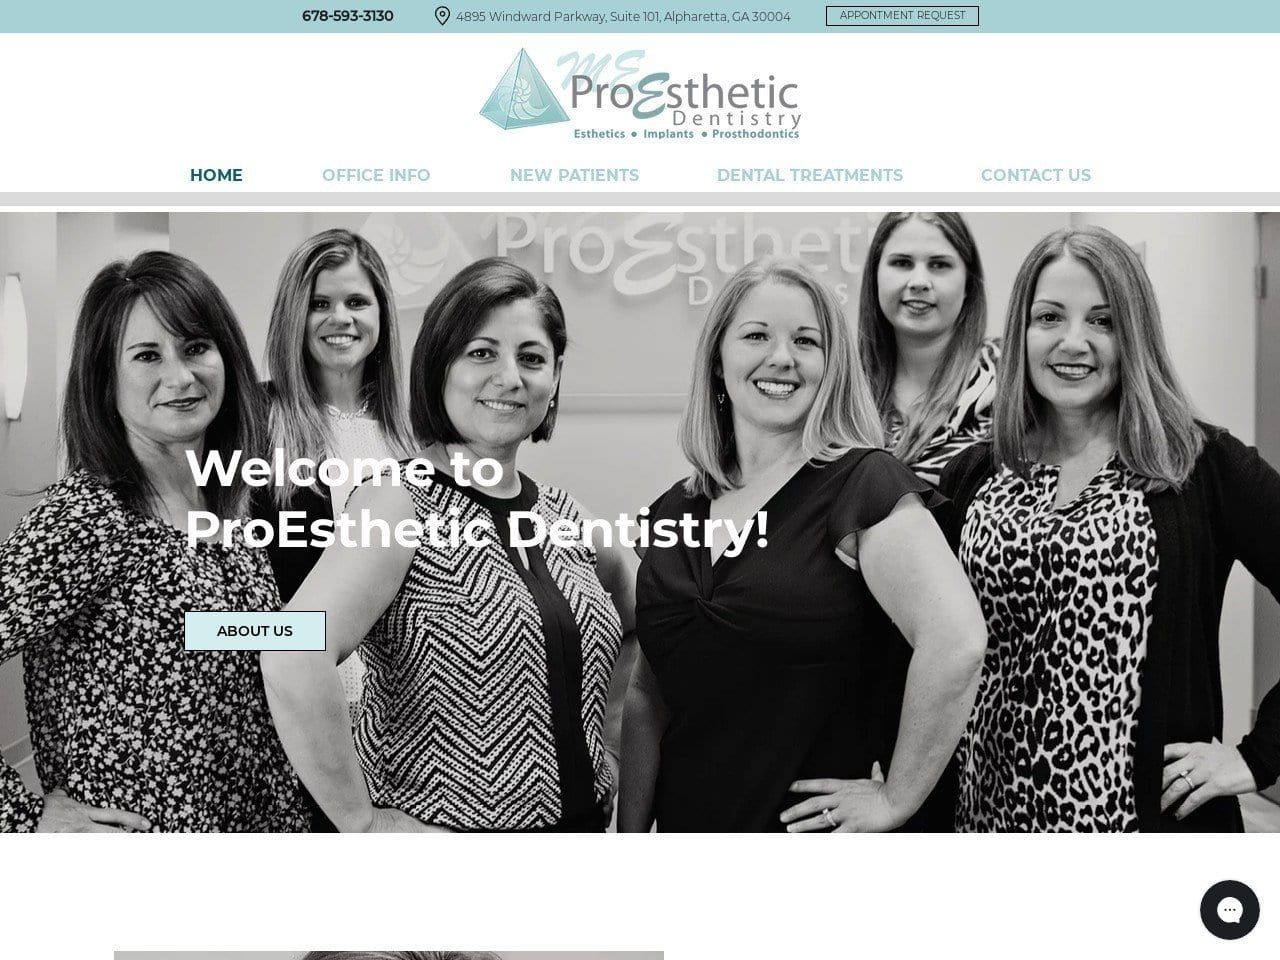 ProEsthetic Dentistry Website Screenshot from proestheticdentistry.com